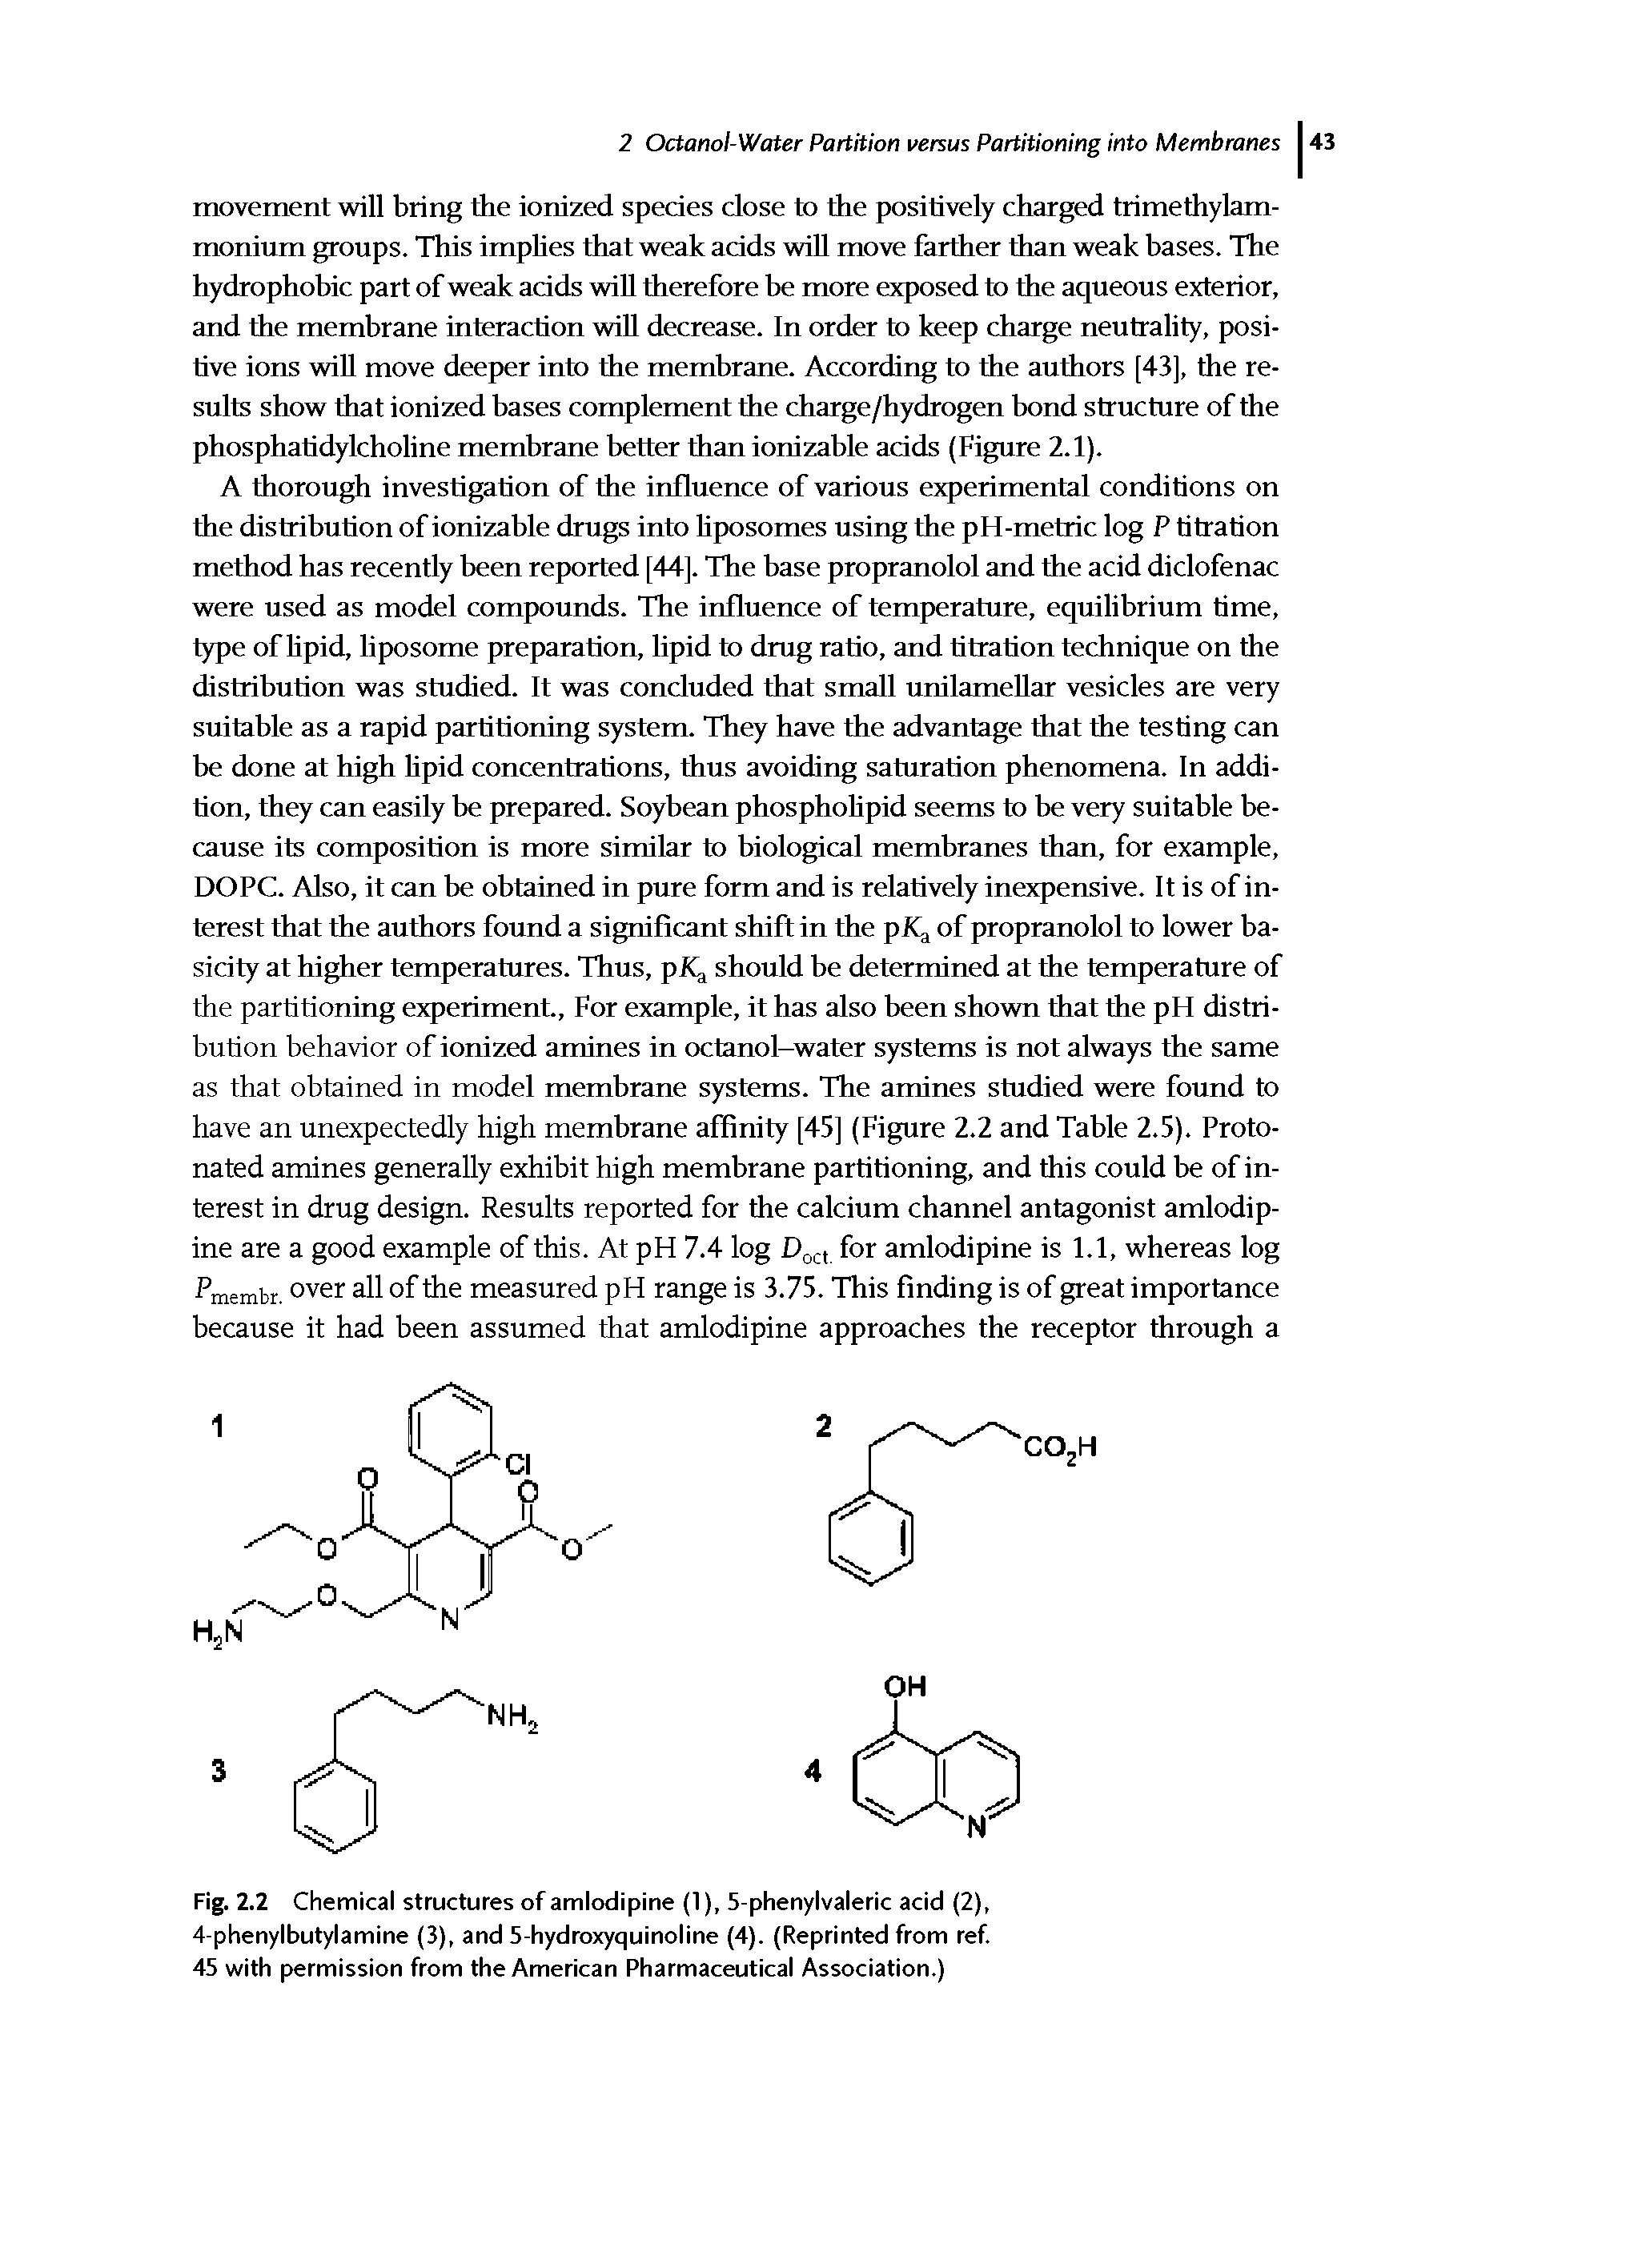 Fig. 2.2 Chemical structures of amlodipine (1), 5-phenylvaleric acid (2), 4-phenylbutylamine (3), and 5-hydroxyquinoline (4). (Reprinted from ref. 45 with permission from the American Pharmaceutical Association.)...